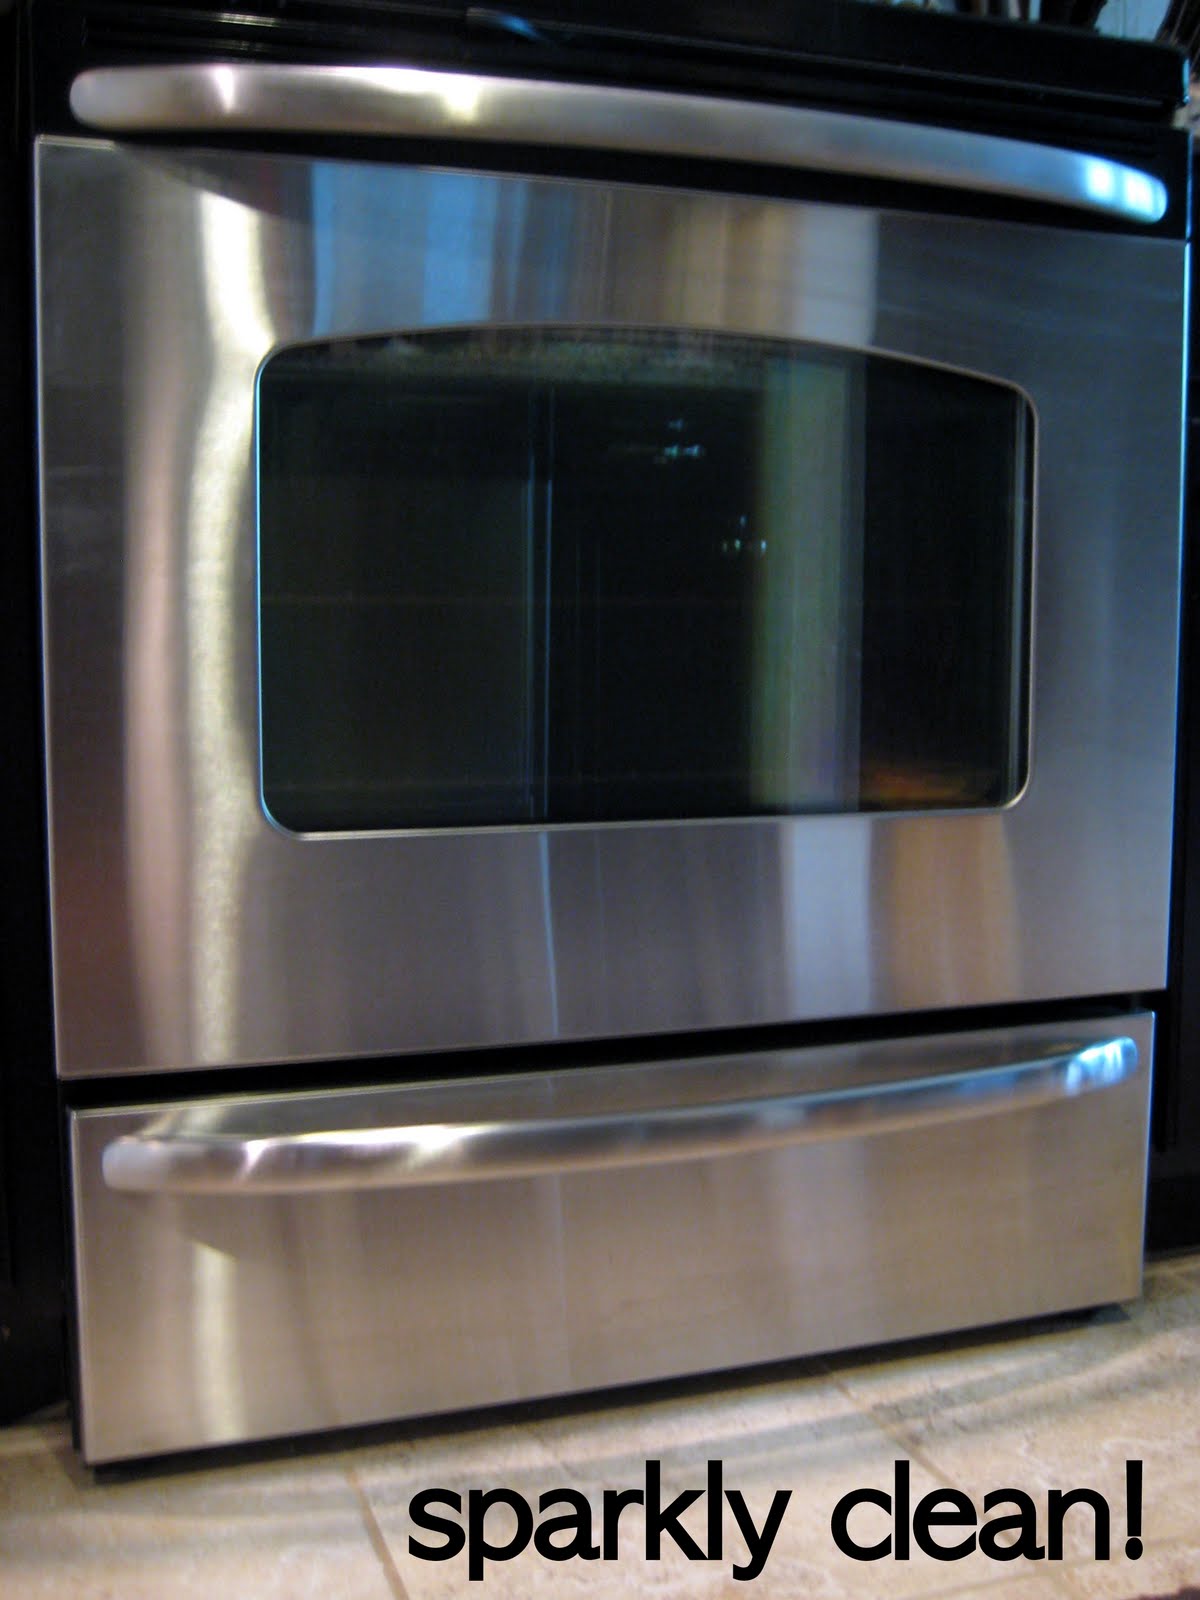 How to Clean Stainless Steel Appliances - DIY Stainless Steel